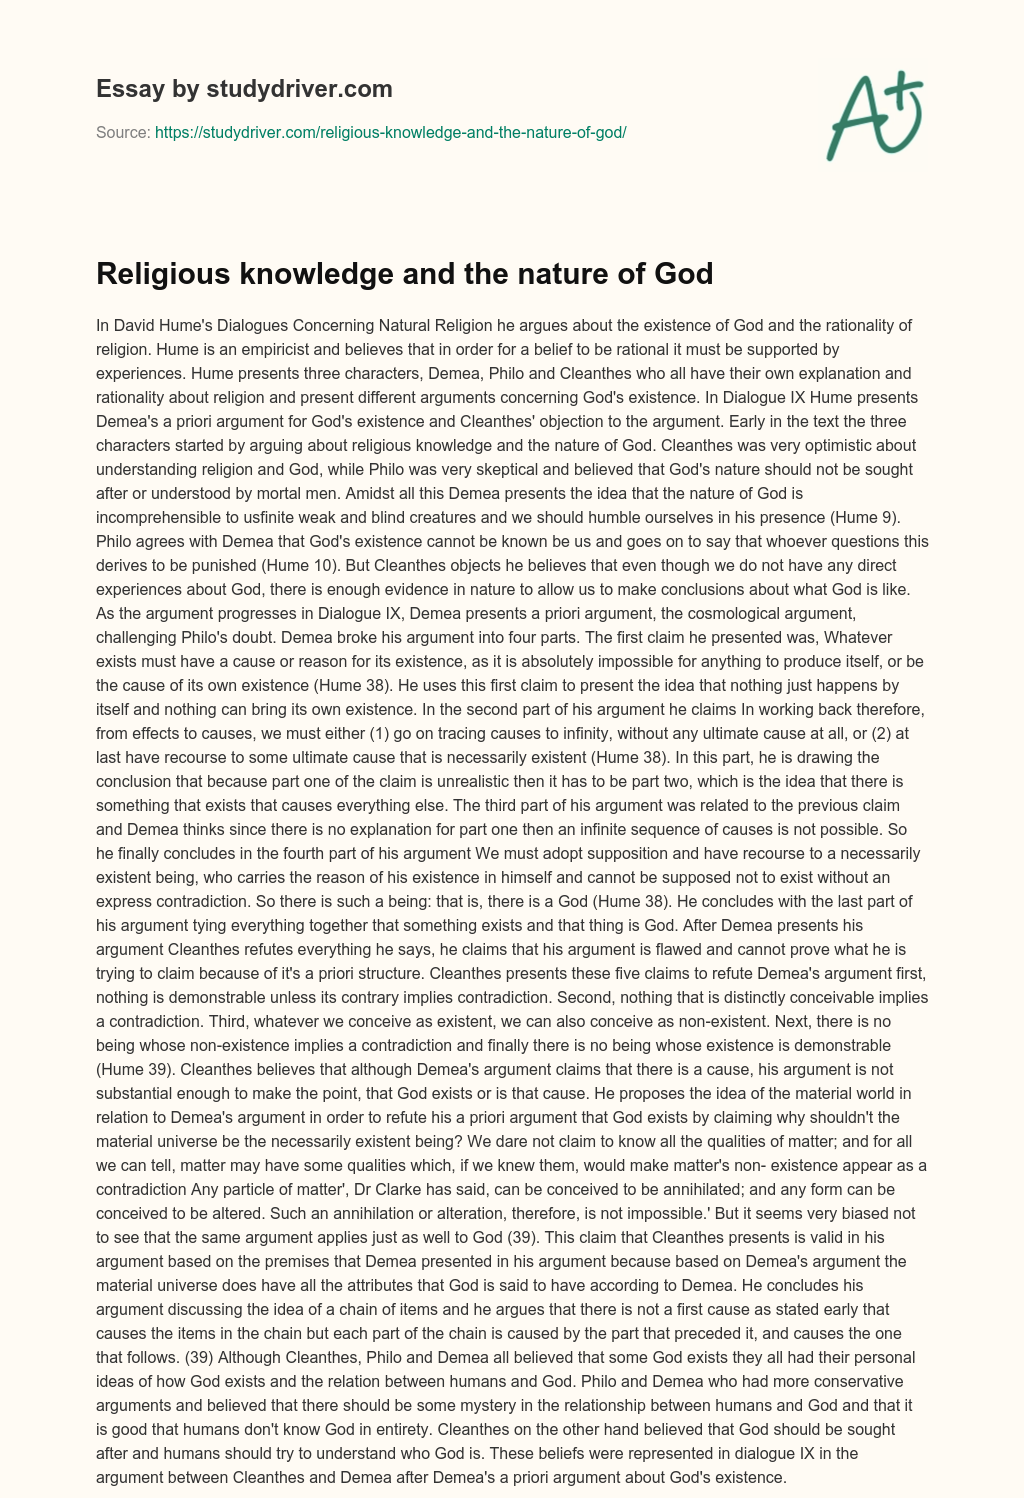 Religious Knowledge and the Nature of God essay